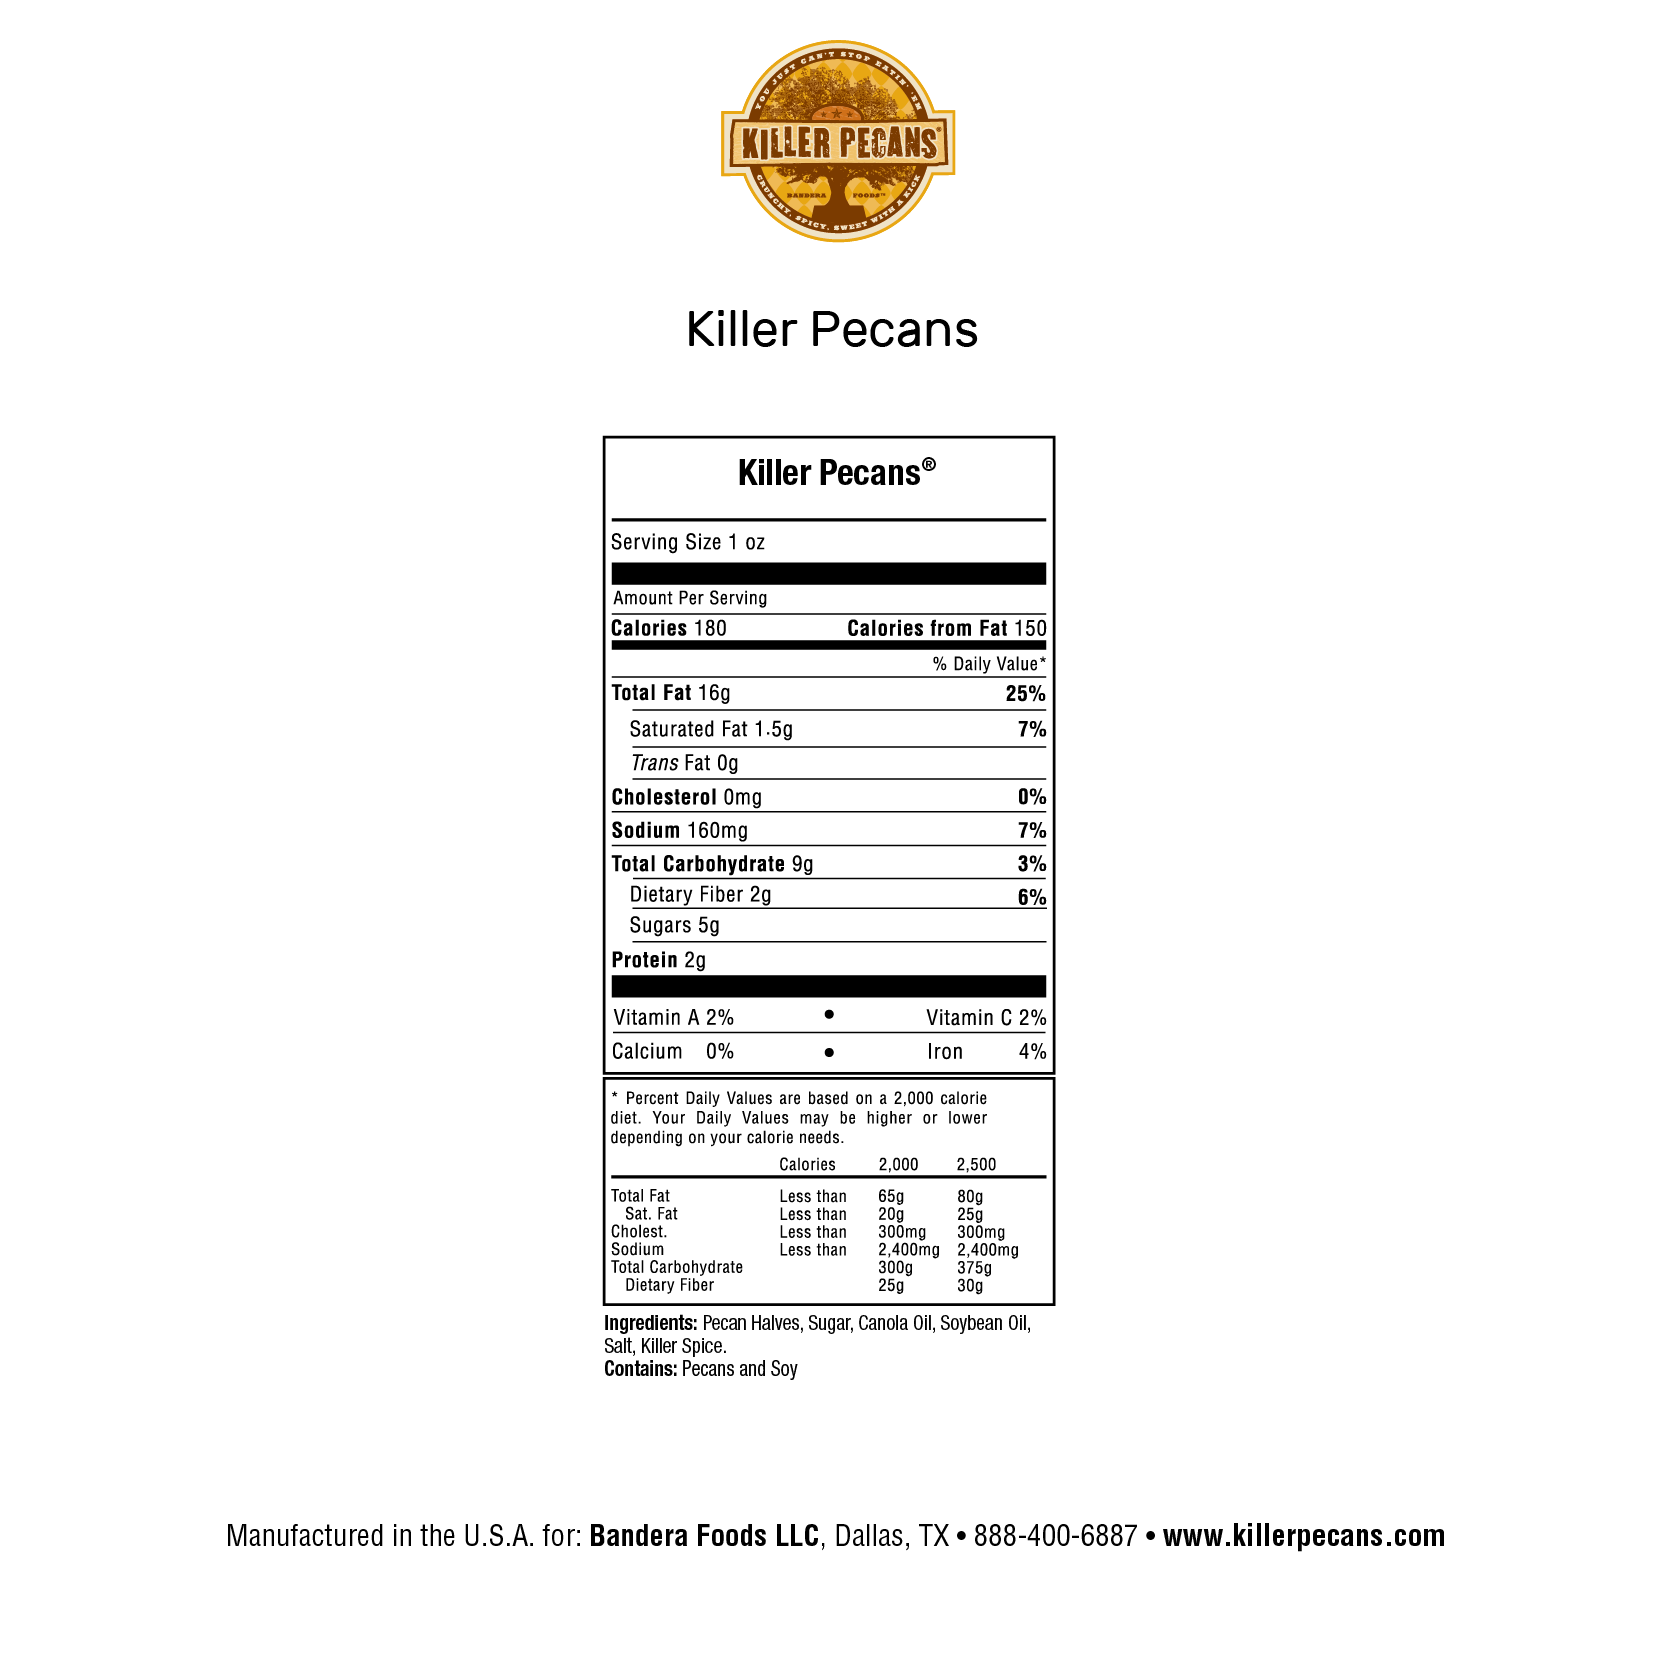 Killer Pecans 4oz bag Crunchy Spicy Sweet with a Kick. All Natural, Gluten-free. Nutrition Panel